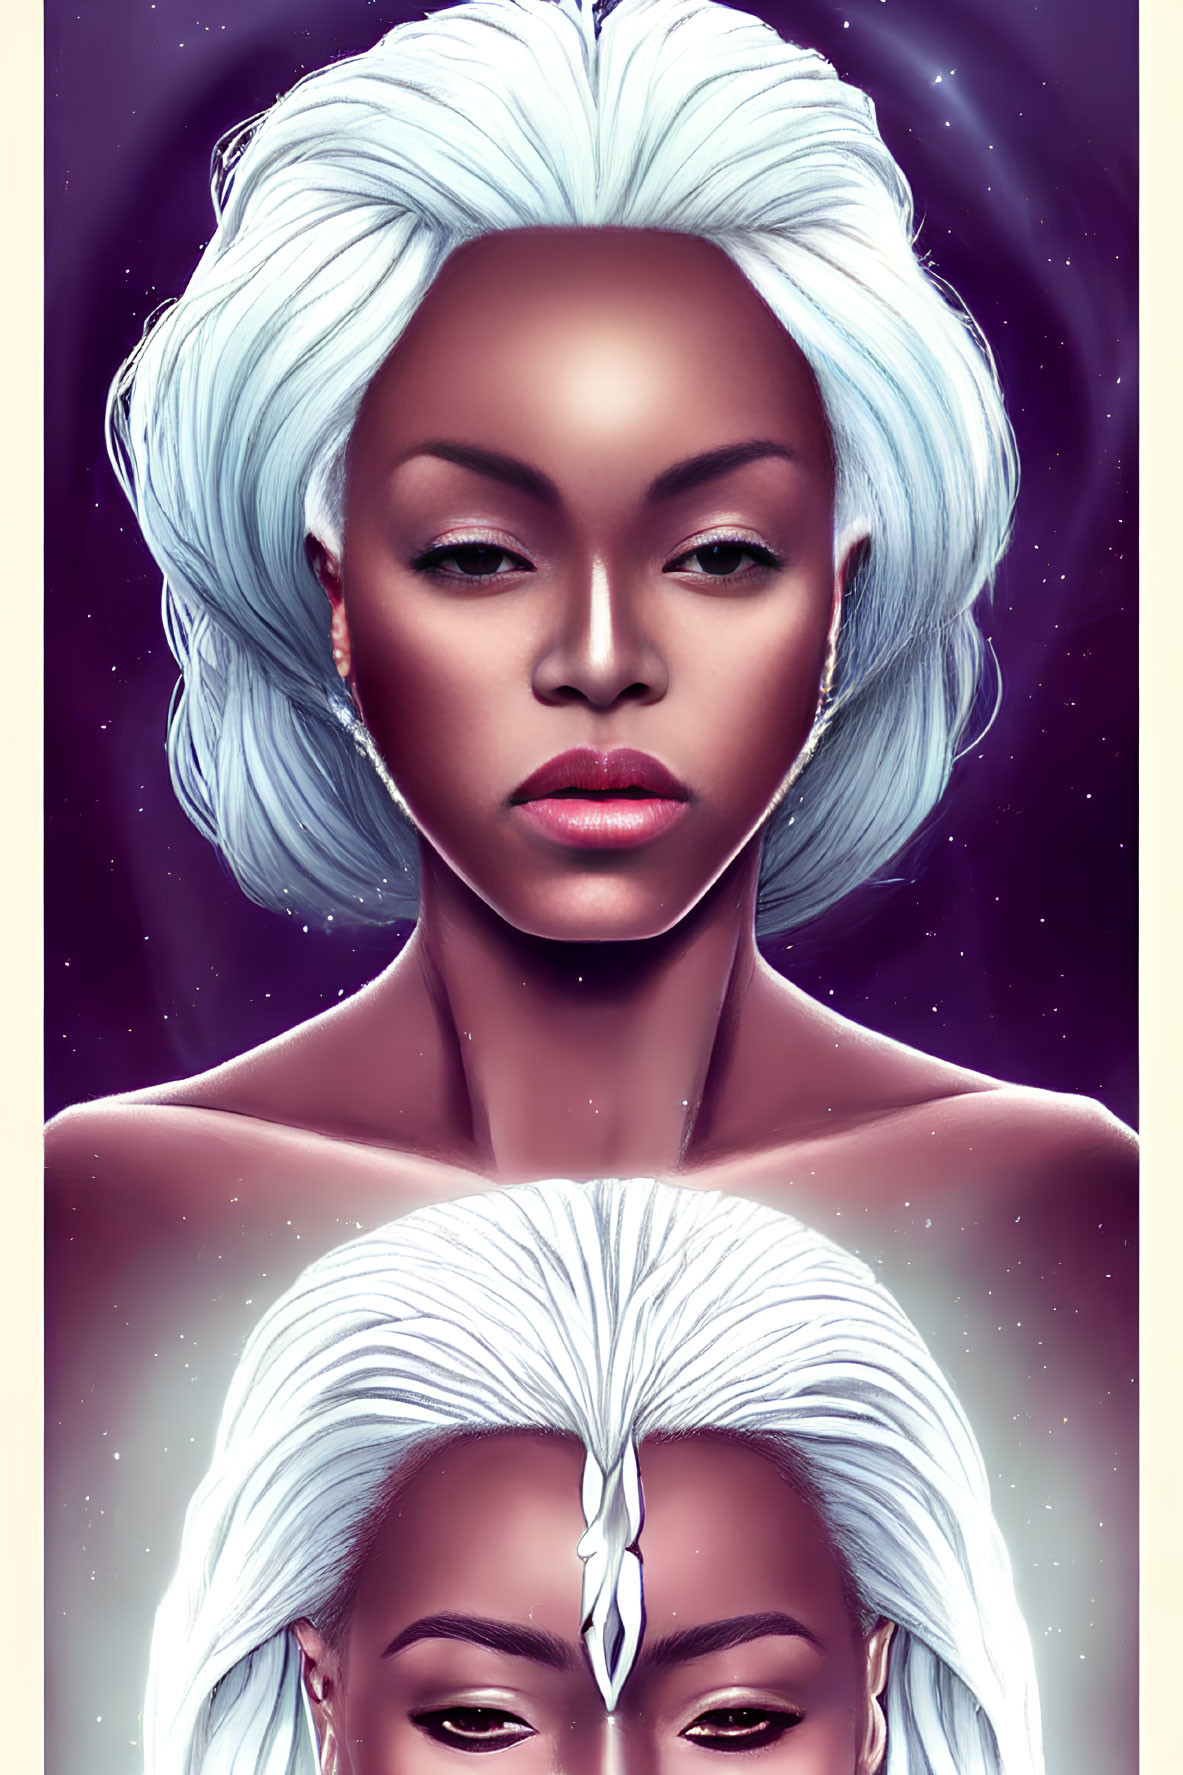 Woman with White Hair in Cosmic Background: Striking and Otherworldly Beauty